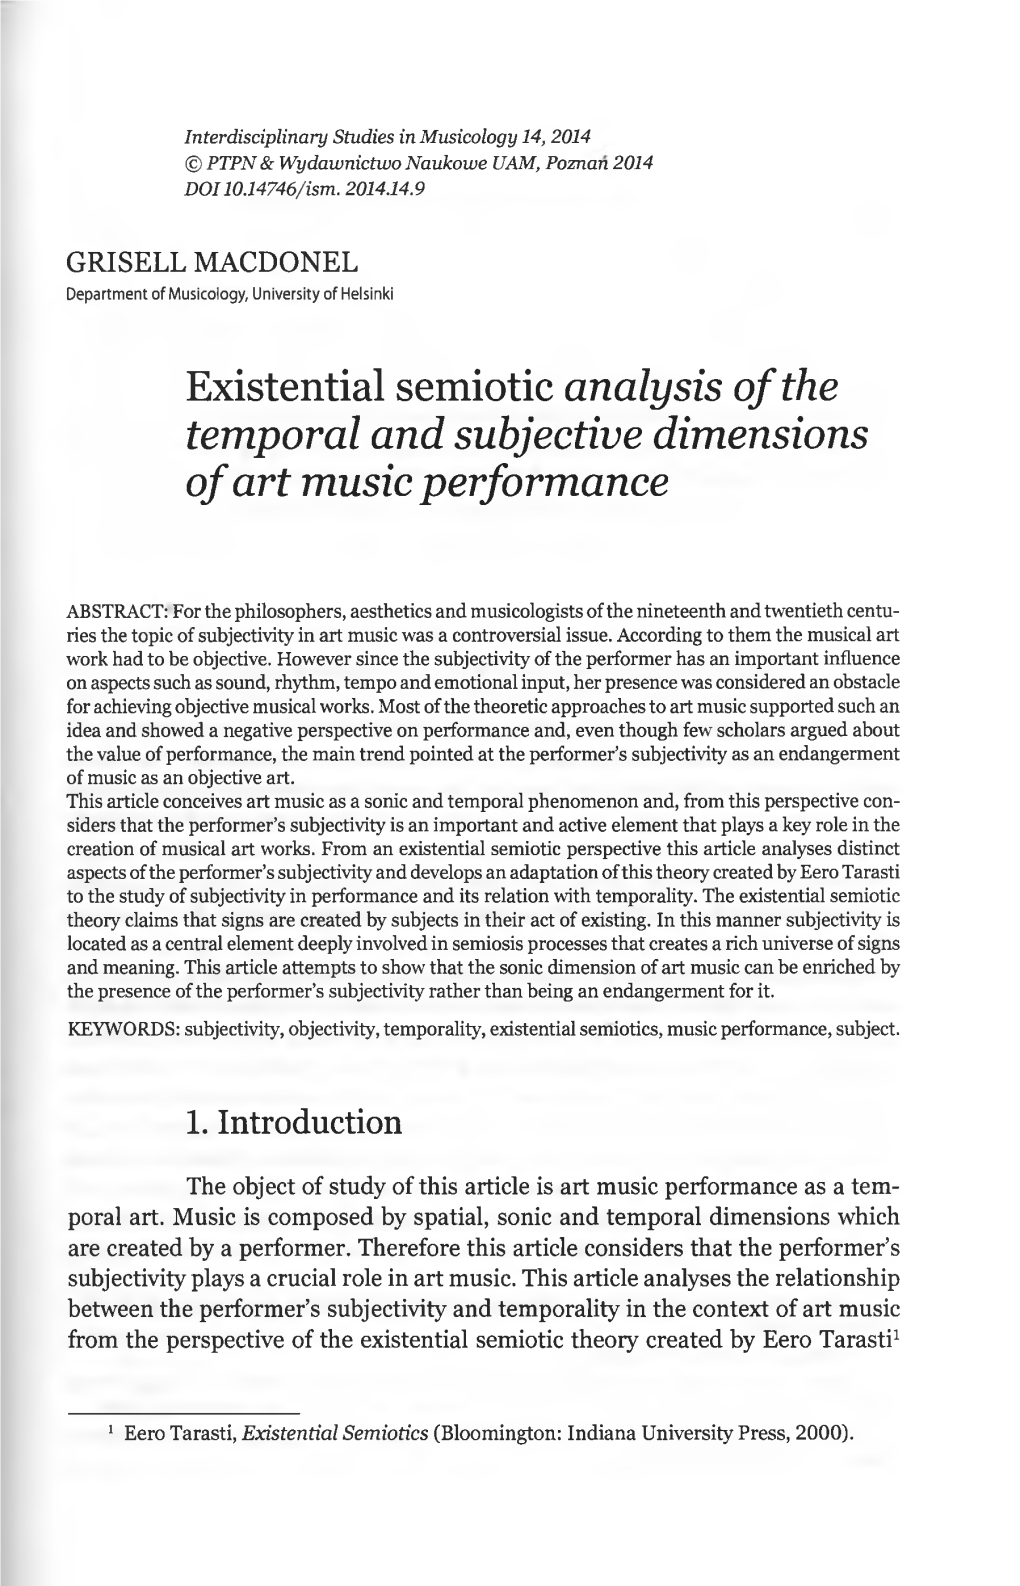 Existential Semiotic Analysis of the Temporal and Subjective Dimensions of Art Music Performance